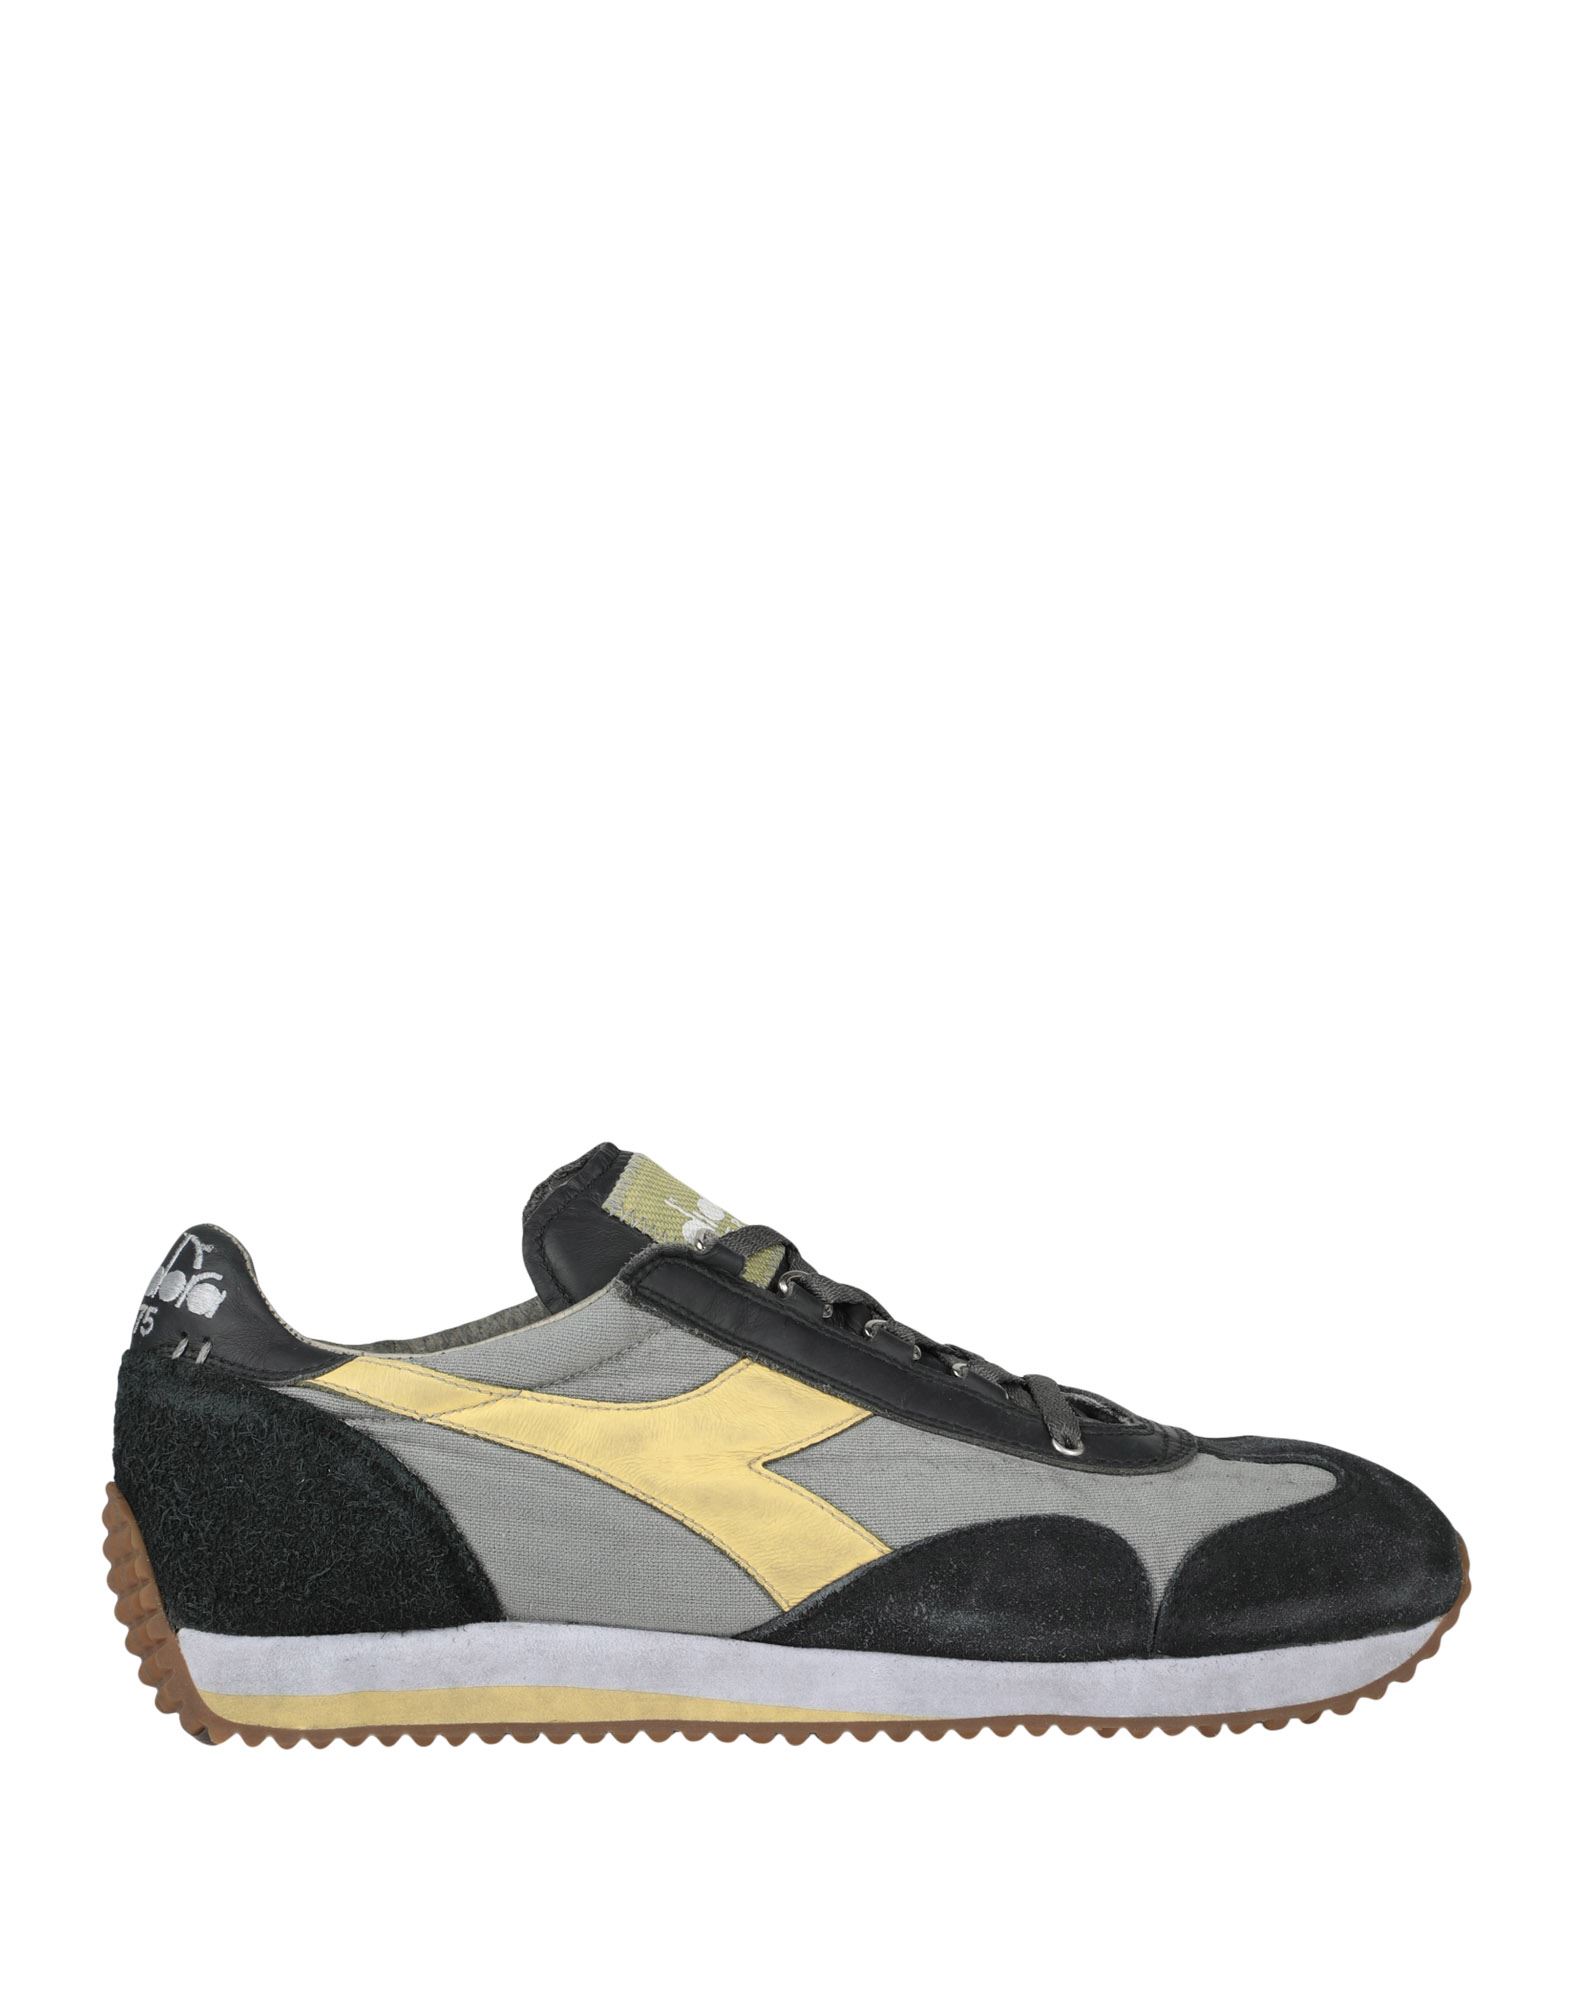 Shop Diadora Heritage Equipe H Dirty Stone Wash Evo Man Sneakers Grey Size 8.5 Soft Leather, Textile Fibe